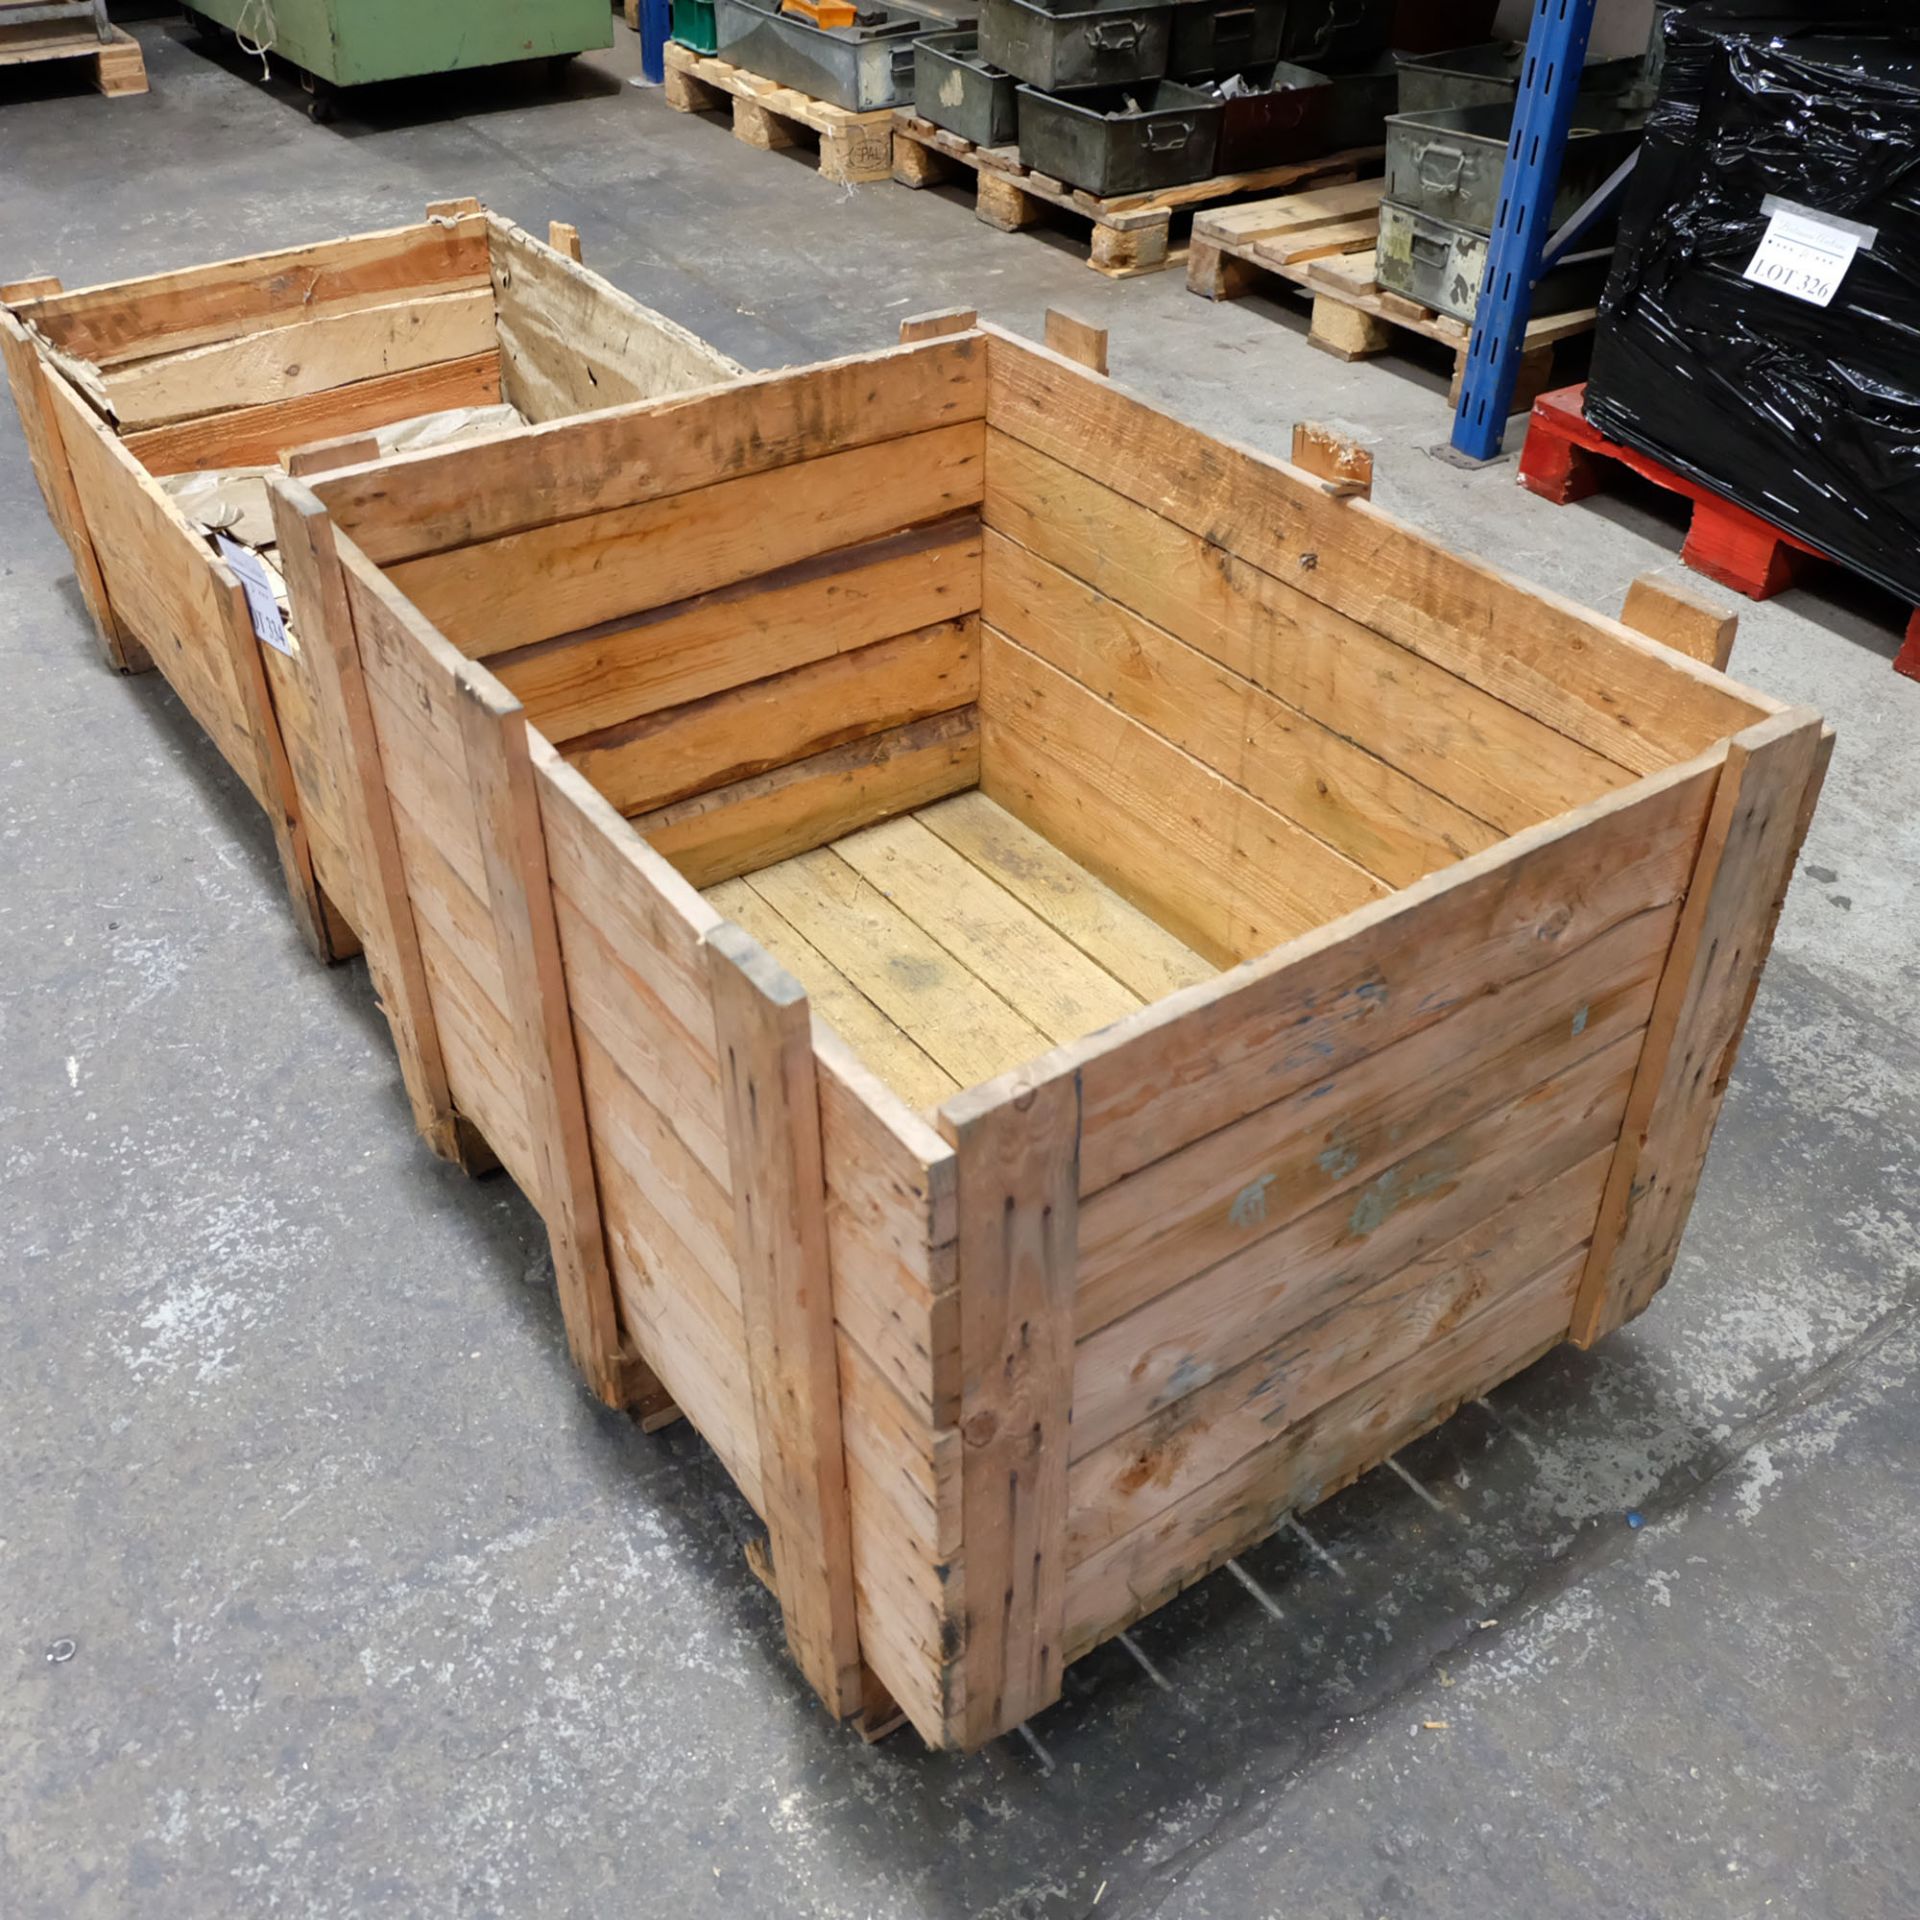 2 x Timber Boxes 35" x 26" x 20" 45" x 26" x 11" - Image 2 of 4